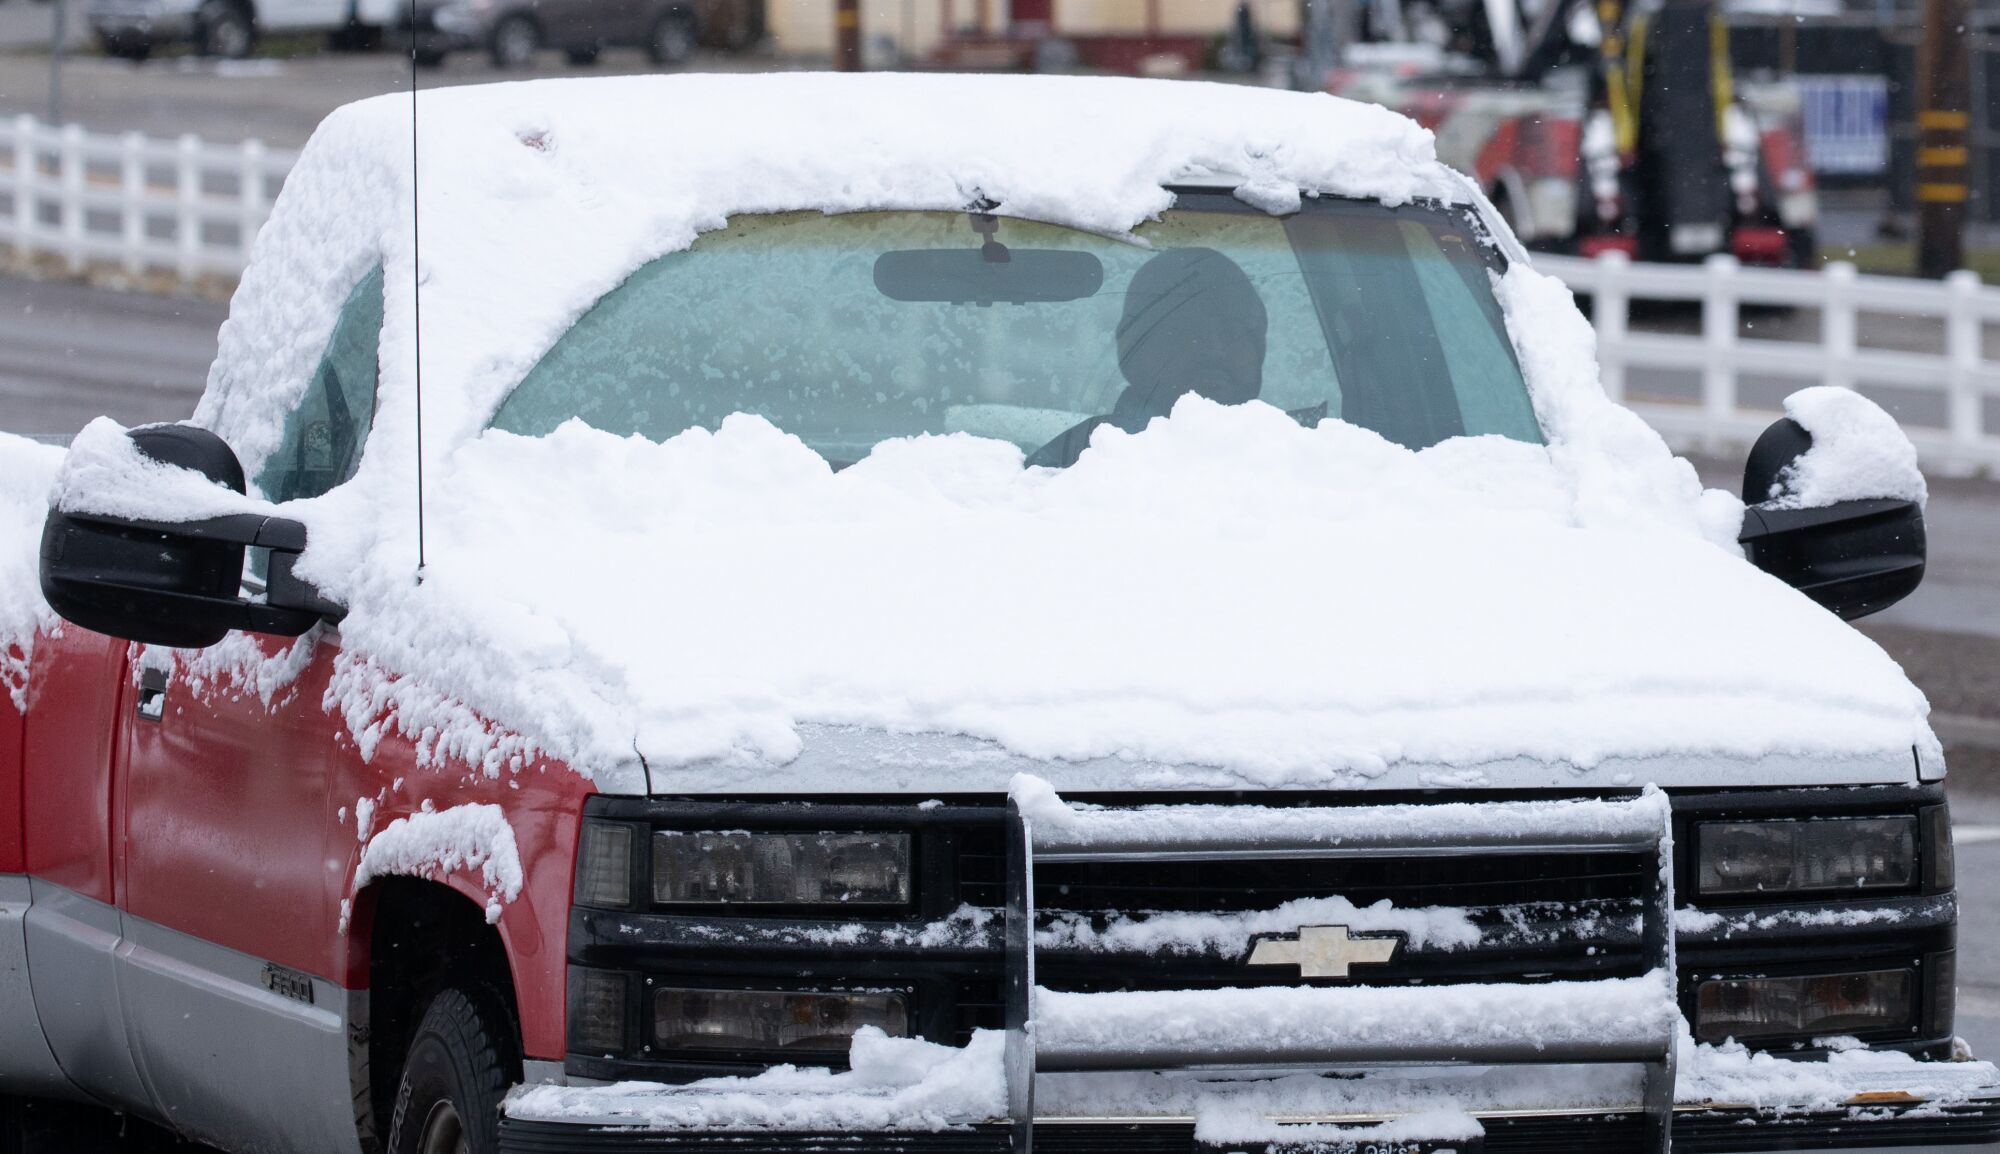 A motorist drives a van with the hood and roof covered in snow